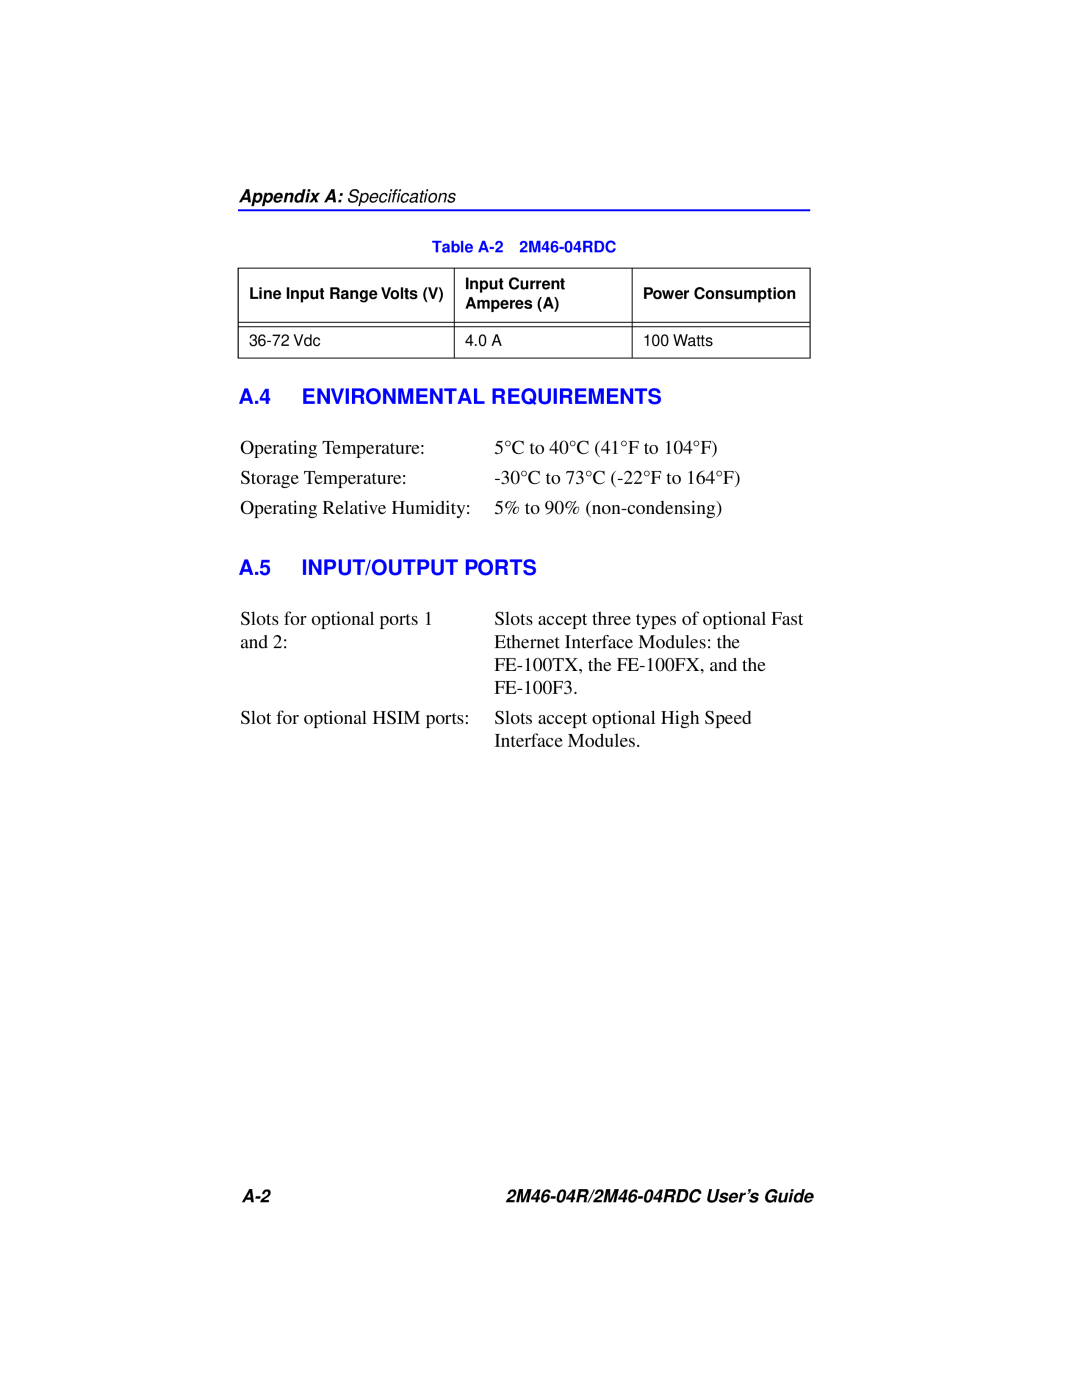 Cabletron Systems pmn manual A.4 ENVIRONMENTAL REQUIREMENTS, A.5 INPUT/OUTPUT PORTS 